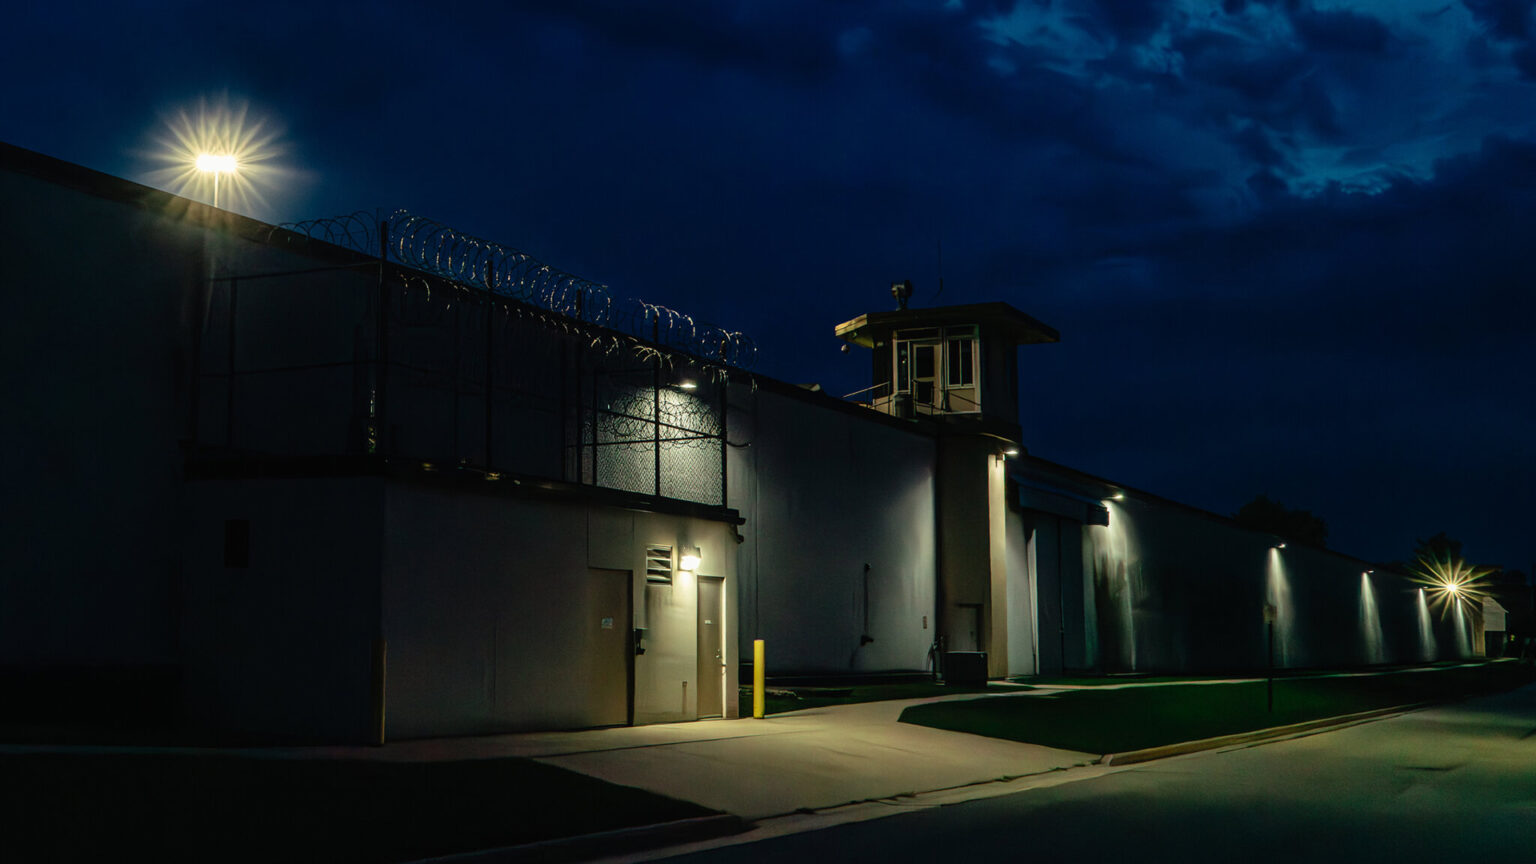 Exterior lighting illuminates the walls, towers and razor wire of a prison under a cloudy nighttime sky.